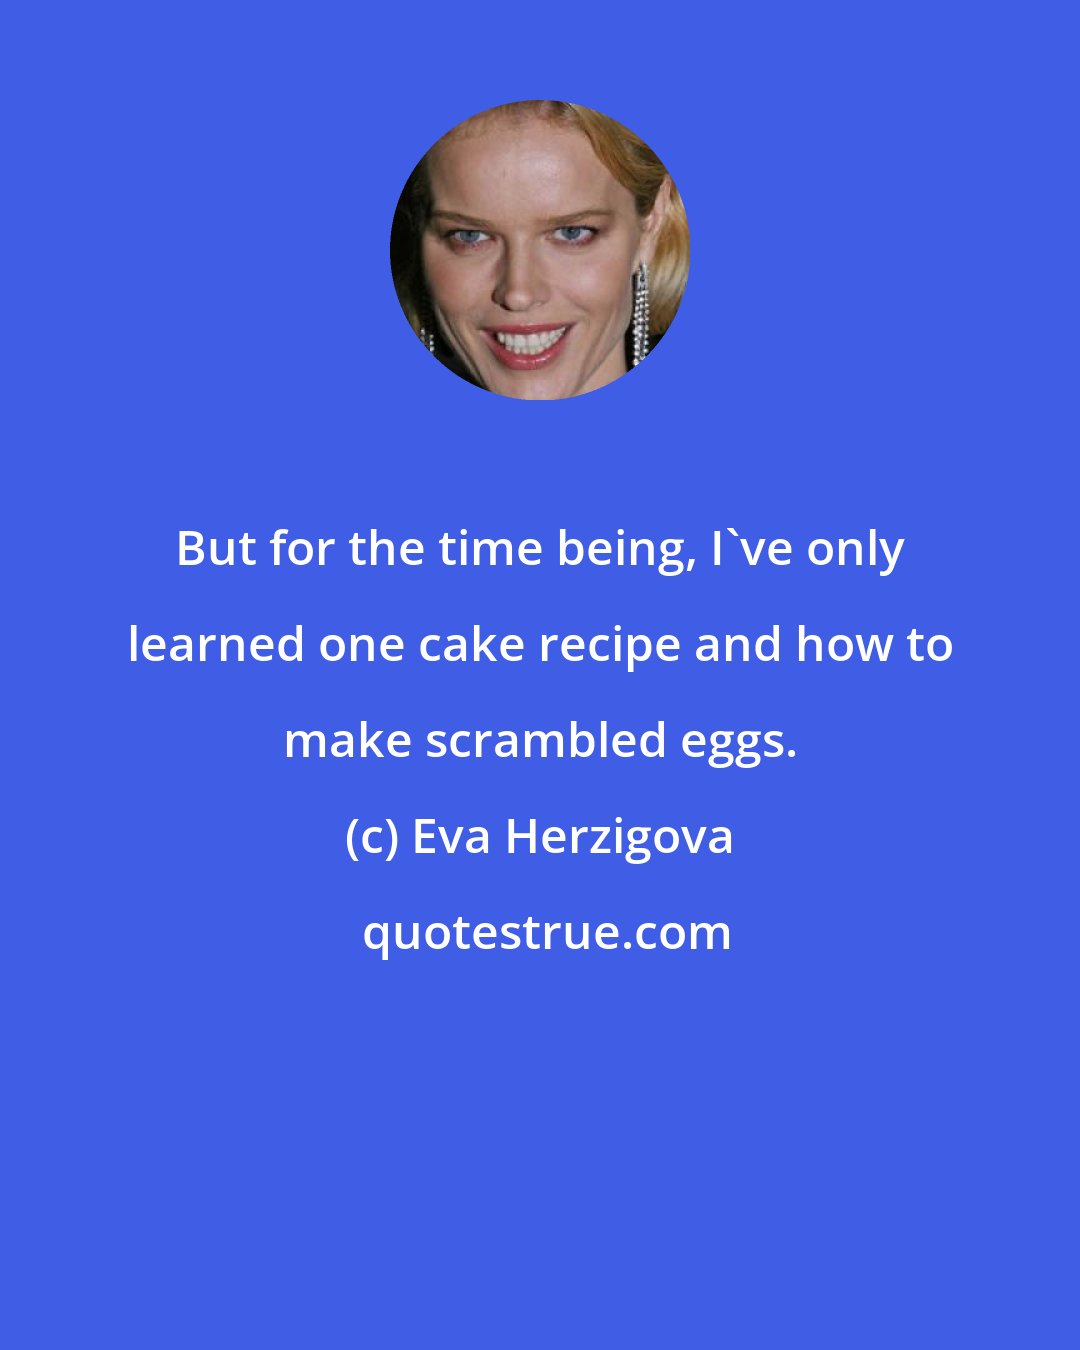 Eva Herzigova: But for the time being, I've only learned one cake recipe and how to make scrambled eggs.